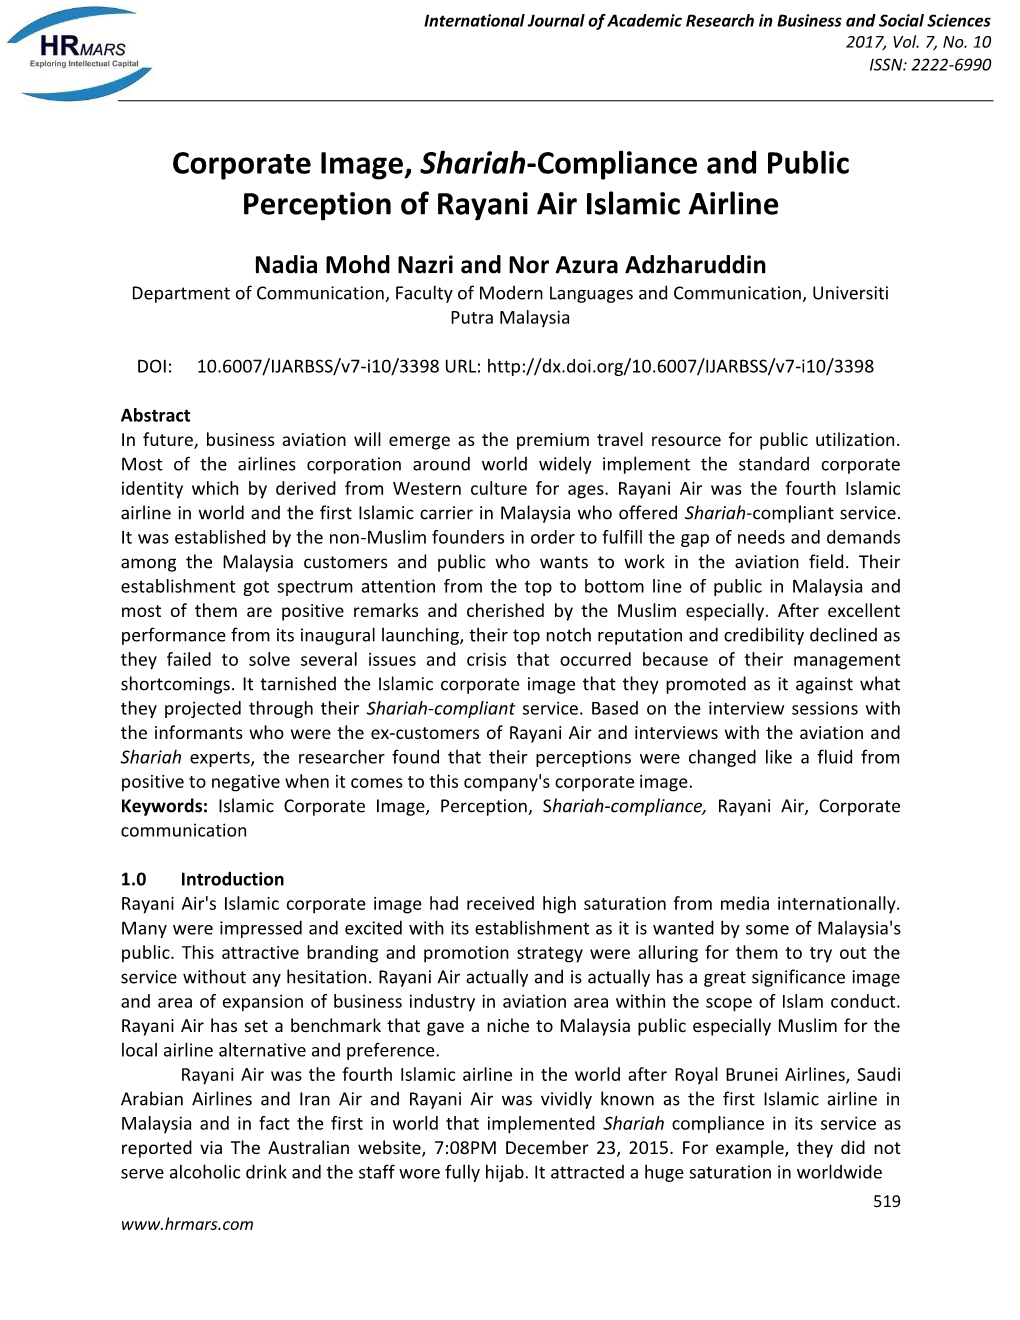 Corporate Image, Shariah-Compliance and Public Perception of Rayani Air Islamic Airline